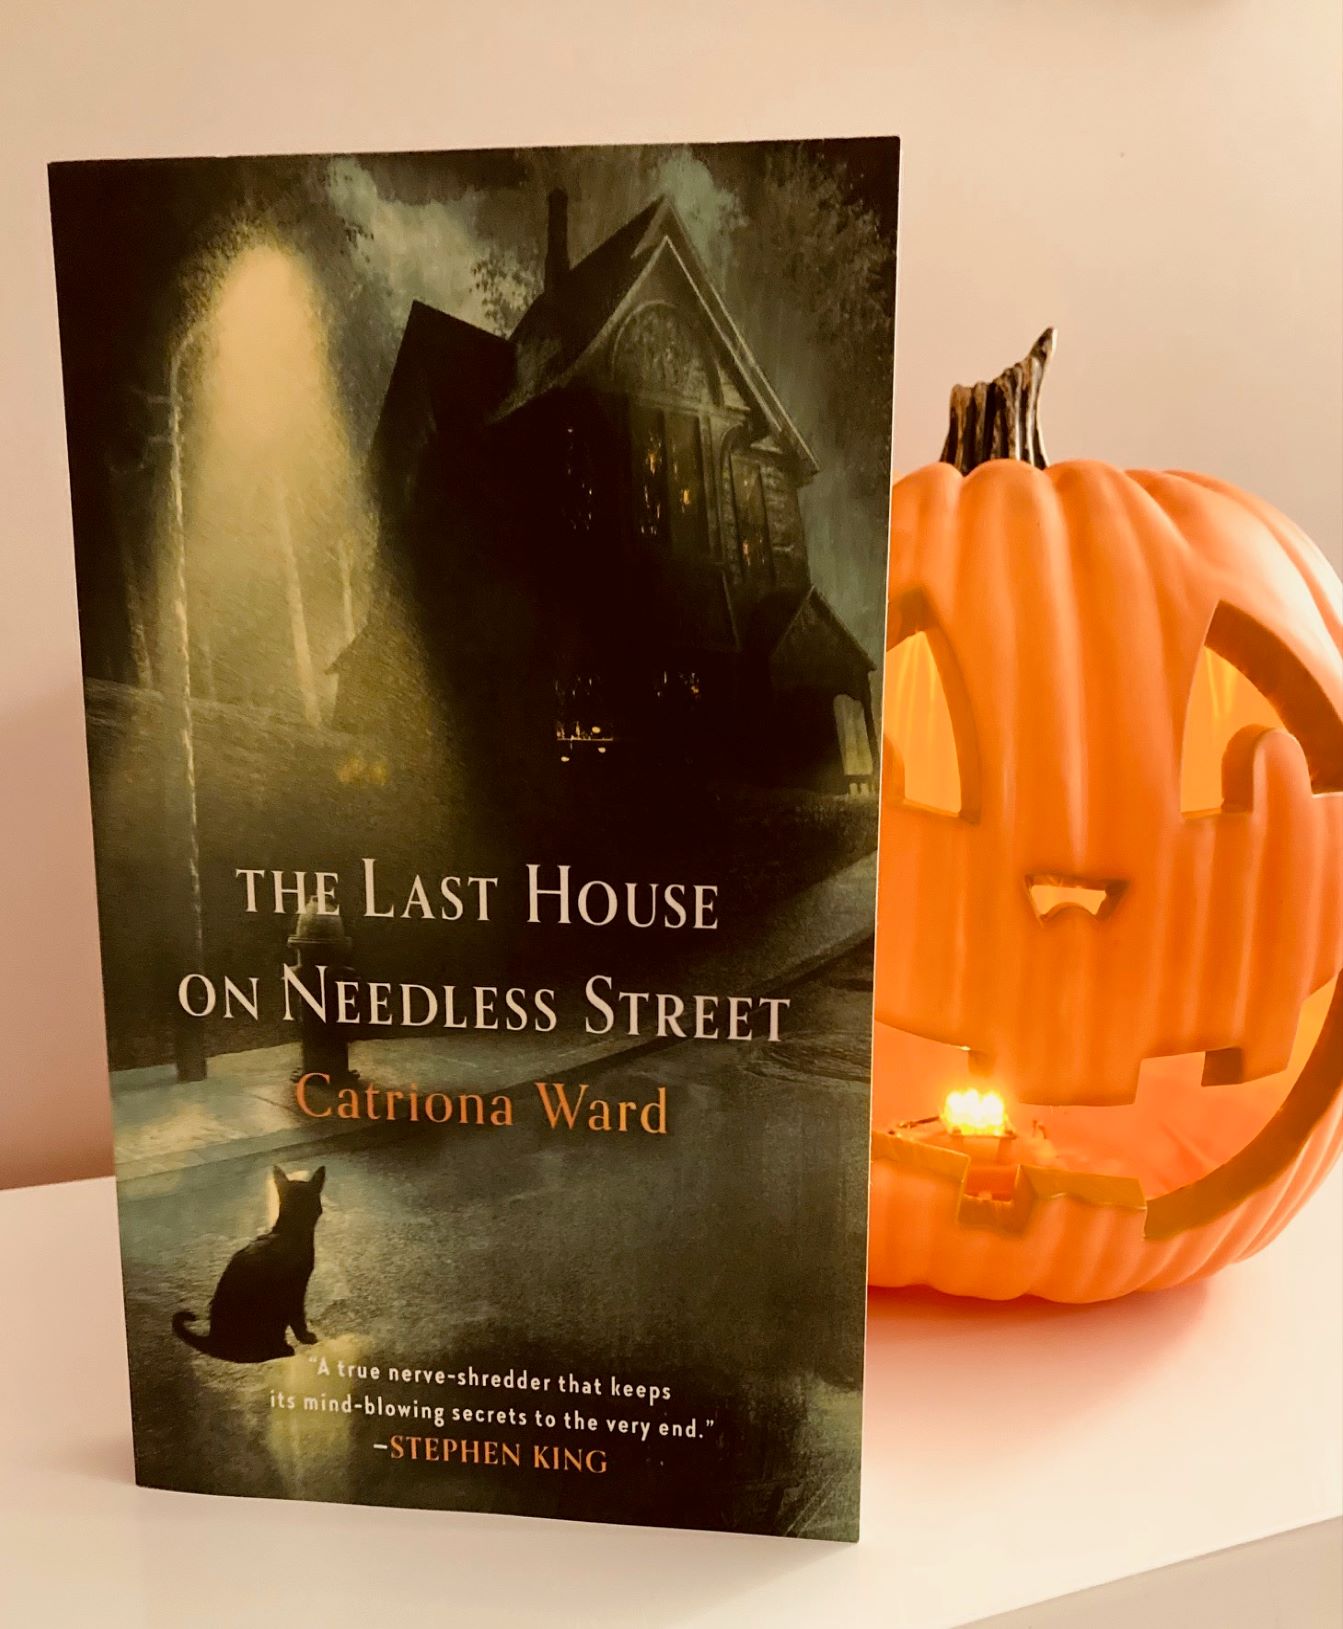 The Last House on Needless Street by Catriona Ward book sitting on a white shelf next to a lit-up plastic jack-o-lantern